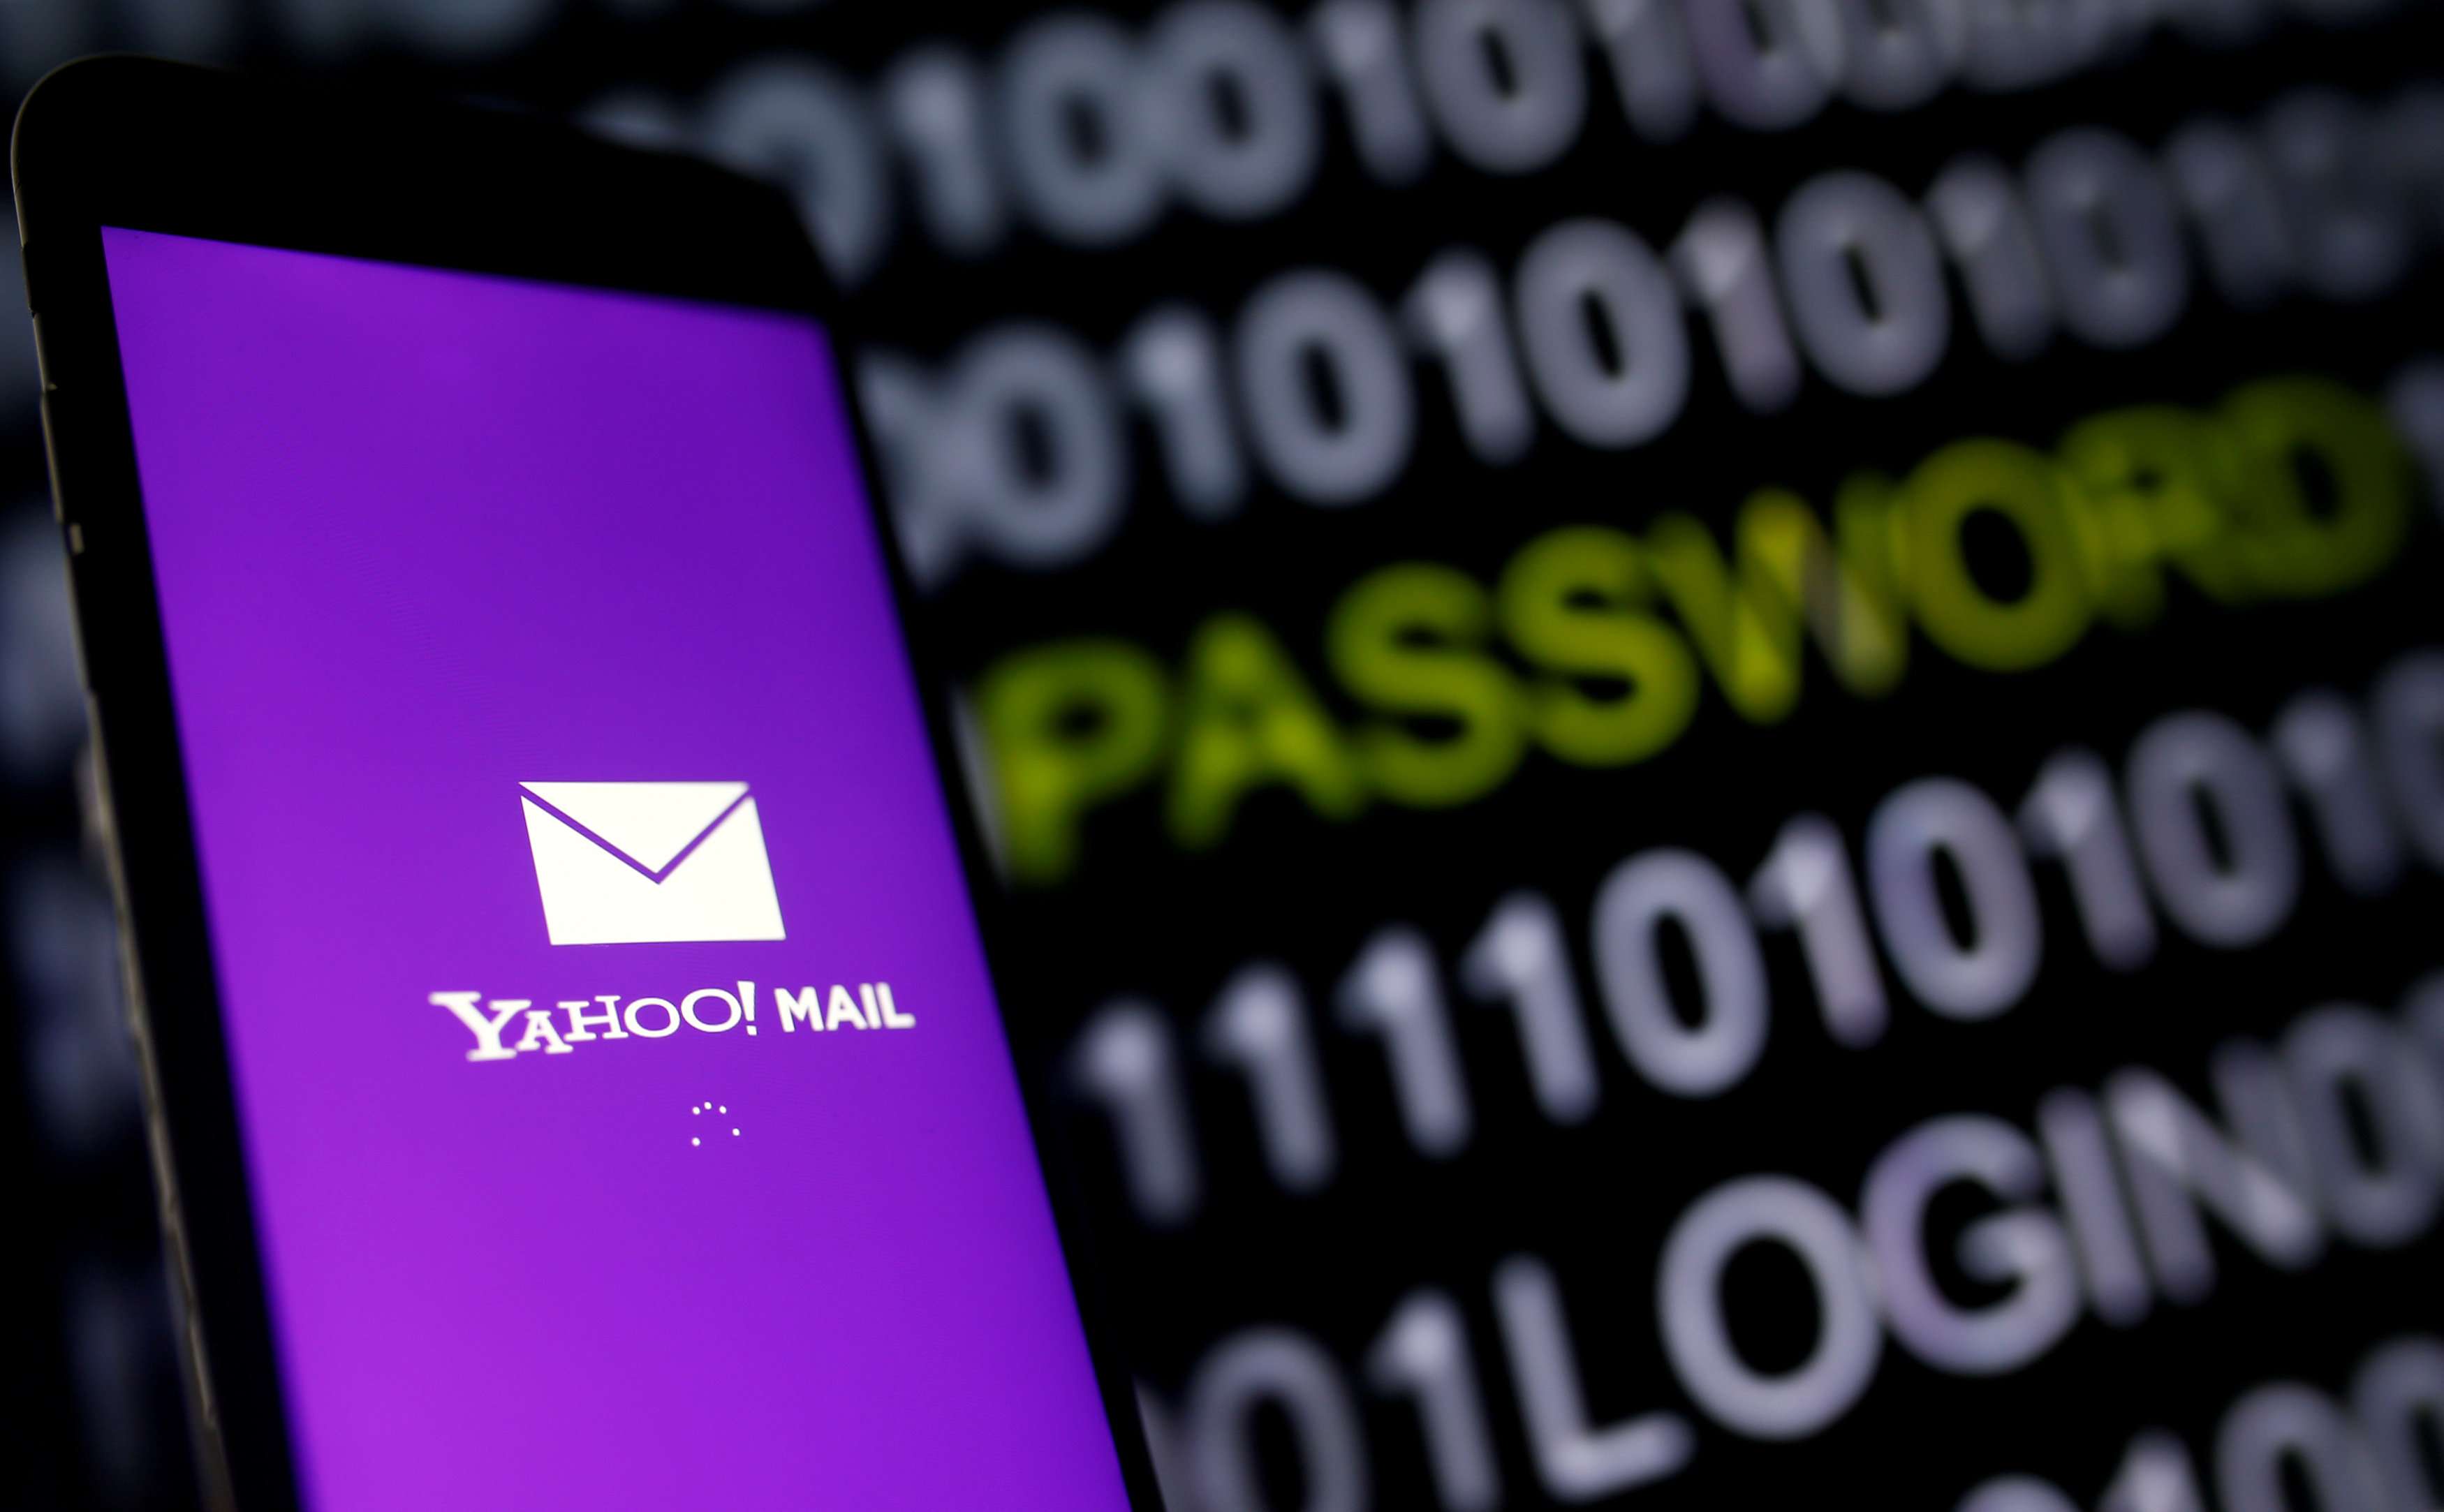 Yahoo has been hit with a series of revelations about massive hacking attacks, with the latest involving a billion-plus users. Photo: Reuters